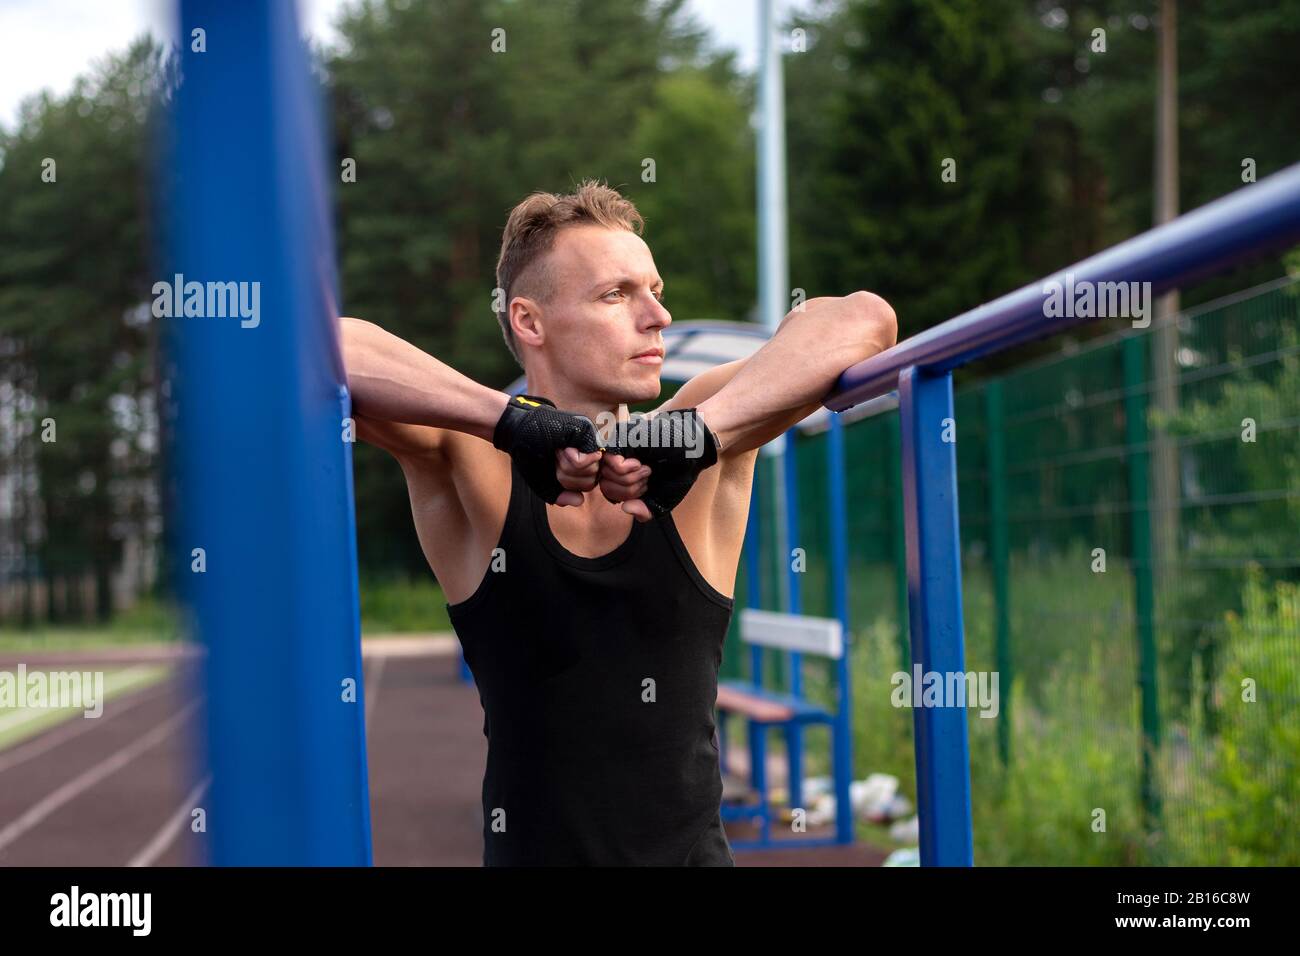 A man is pushing up from parallel bars Stock Photo